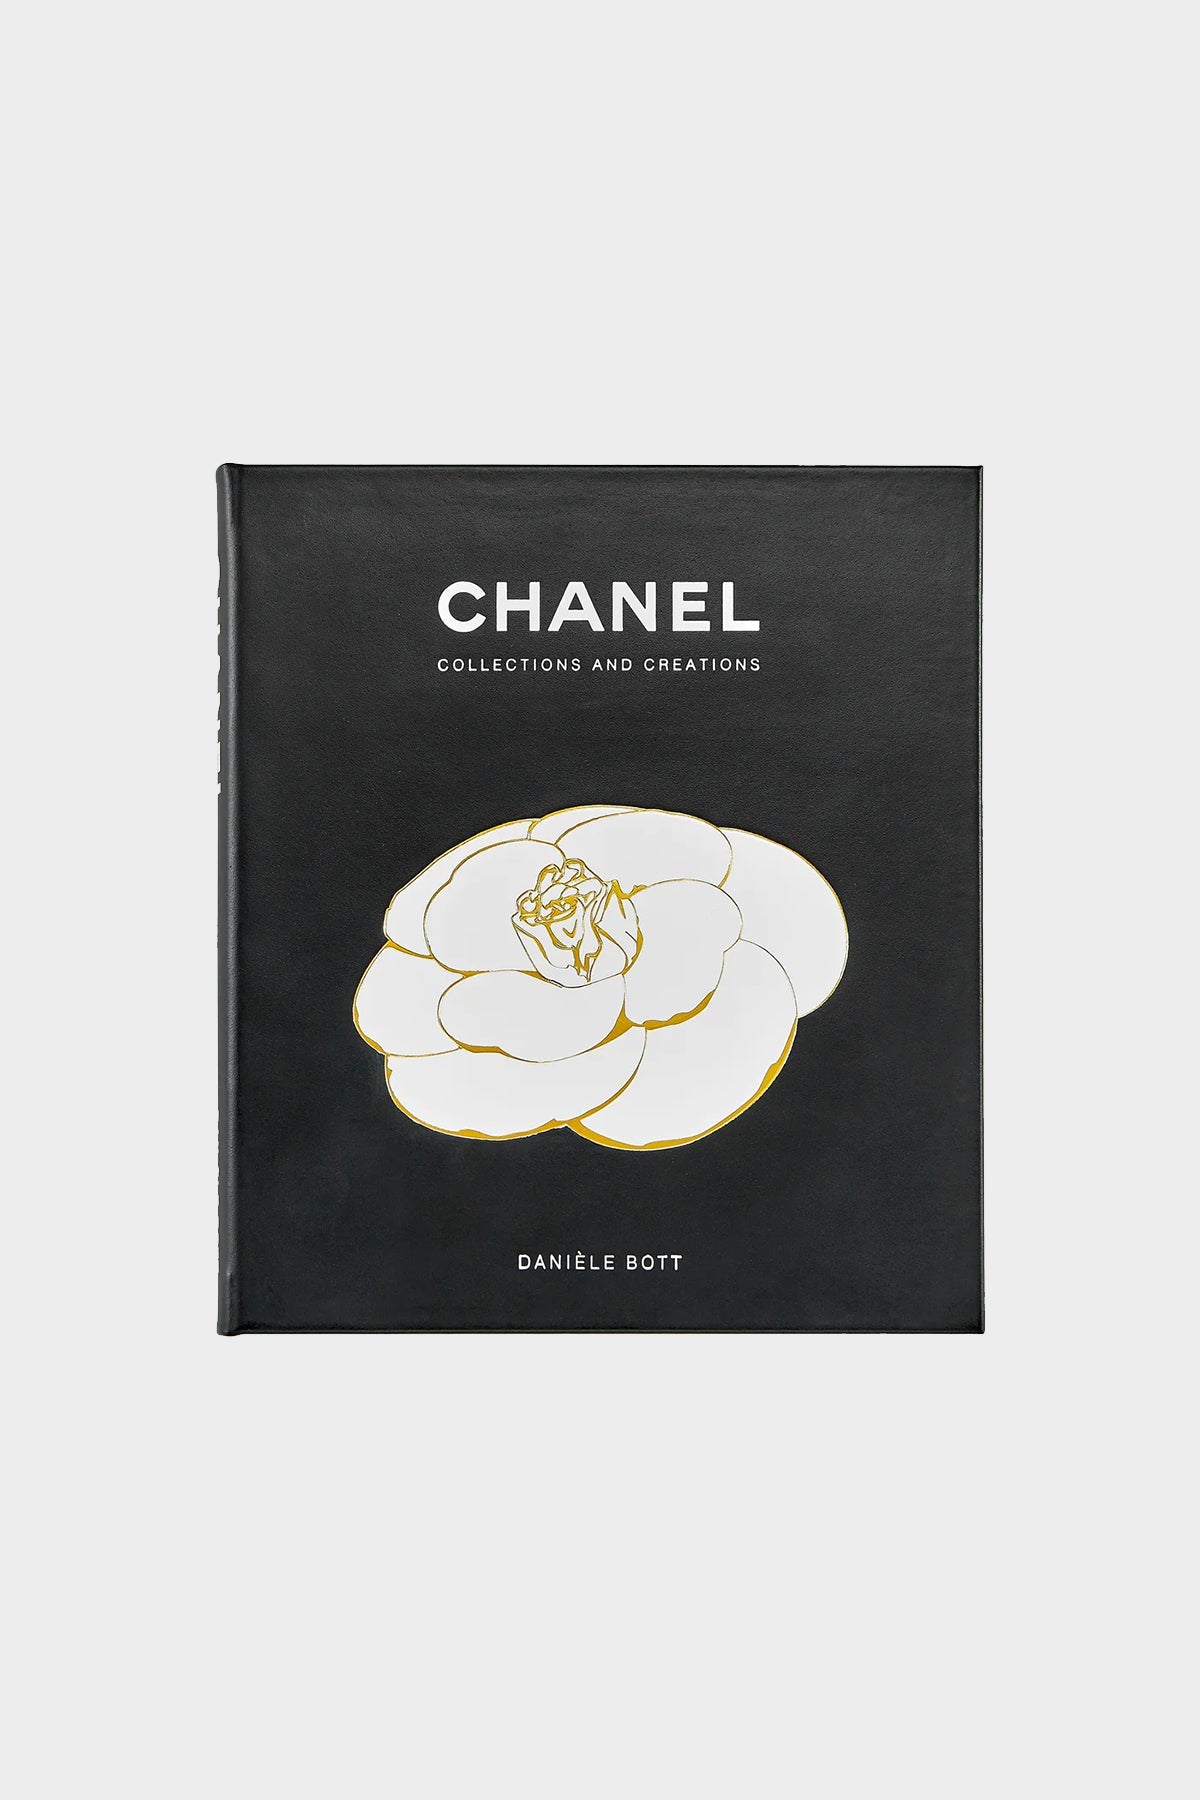 Chanel Collections And Creations - shop-olivia.com